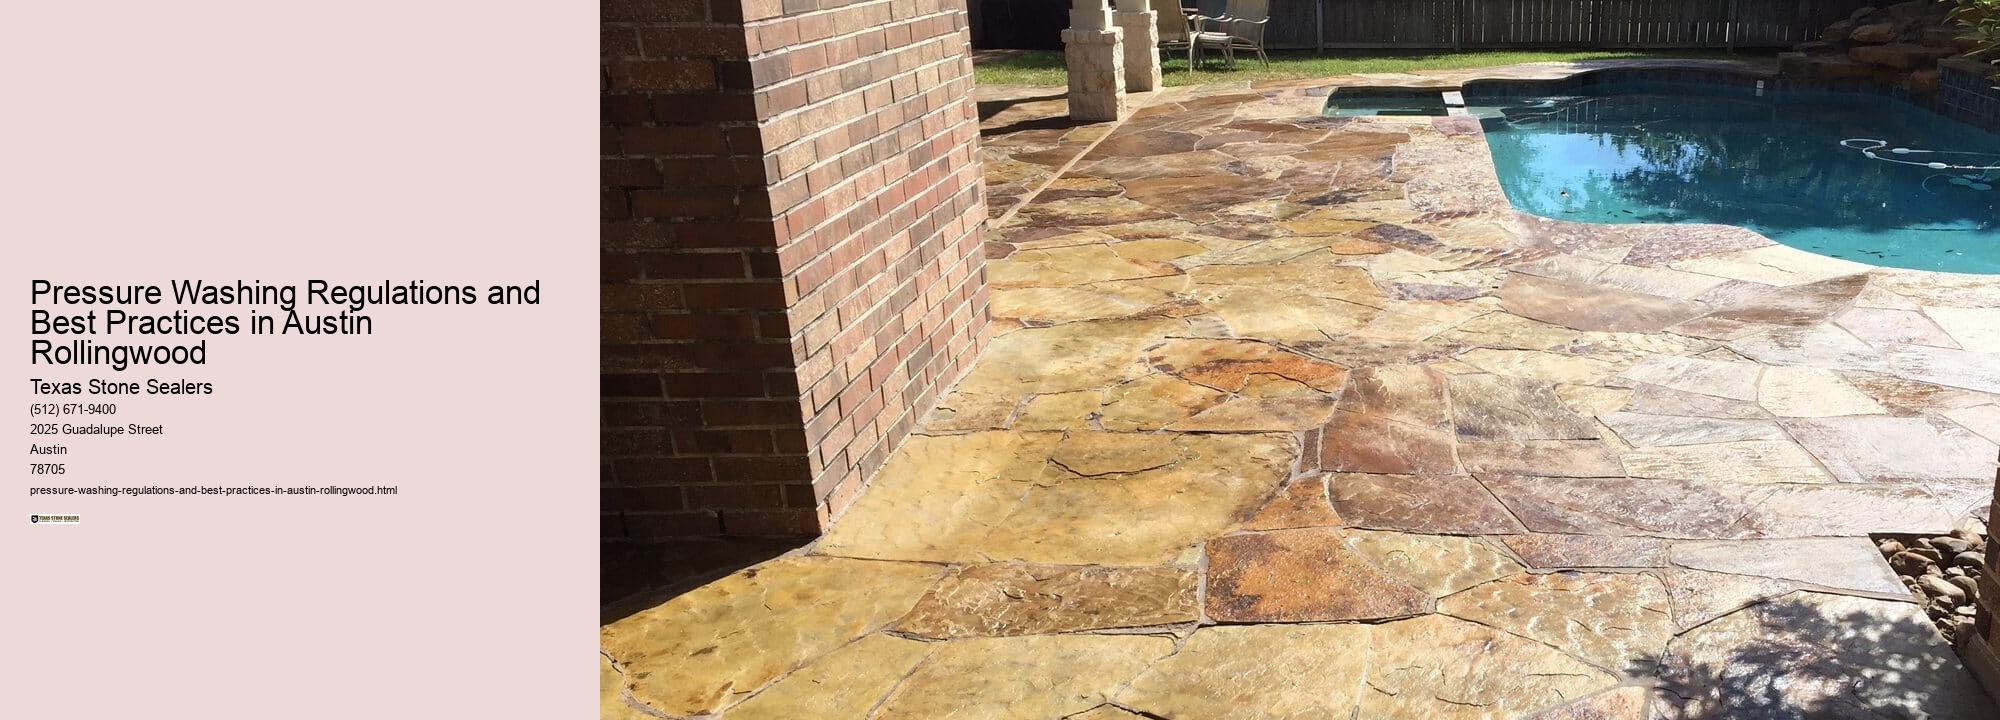 Pressure Washing Regulations and Best Practices in Austin Rollingwood